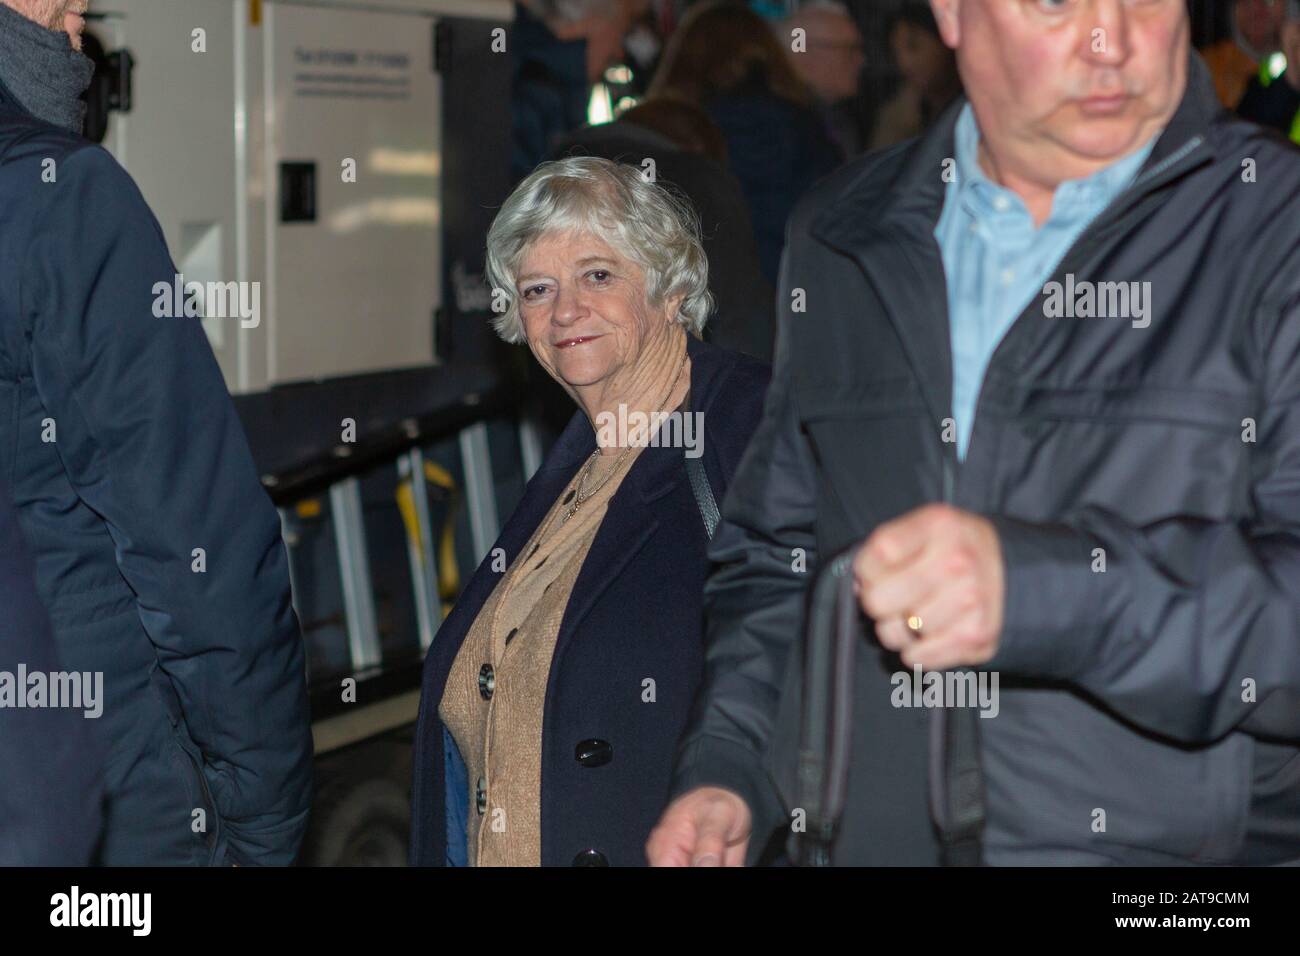 Westminster, London, UK. 31st Jan, 2020. Nigel Farage and Ann Widdecombe backstage before speaking at Parliament Square as Britain prepares to leaves the European Union. Penelope Barritt/Alamy Live News Stock Photo